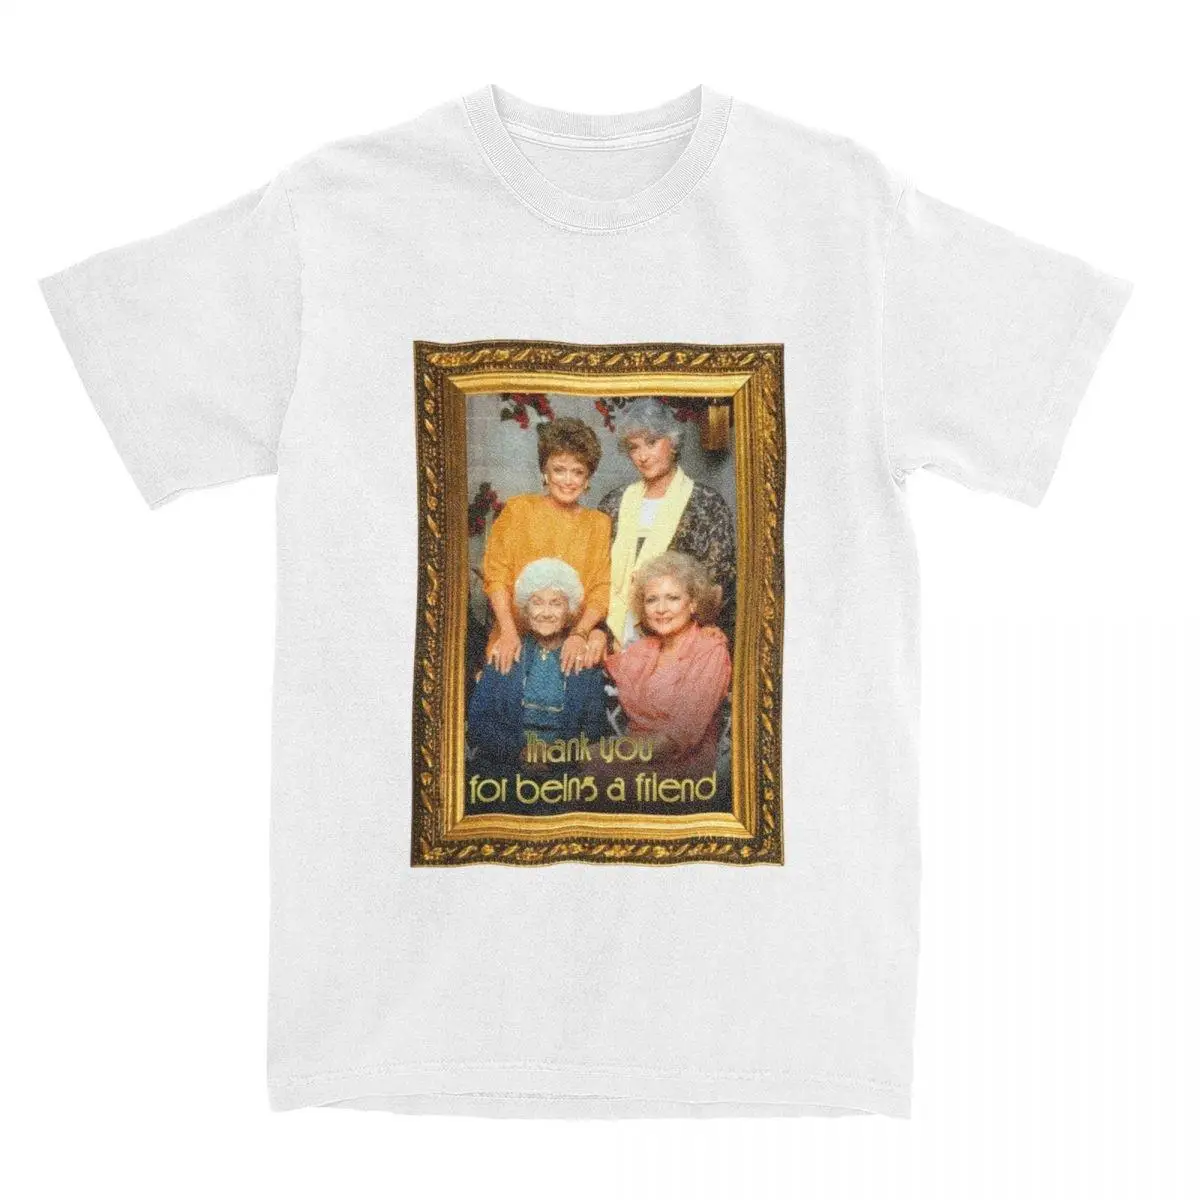 Golden Girls Family Picture T Shirts Men's 100% Cotton Novelty T-Shirt Crewneck Betty White Tee Shirt Short Sleeve Tops Party